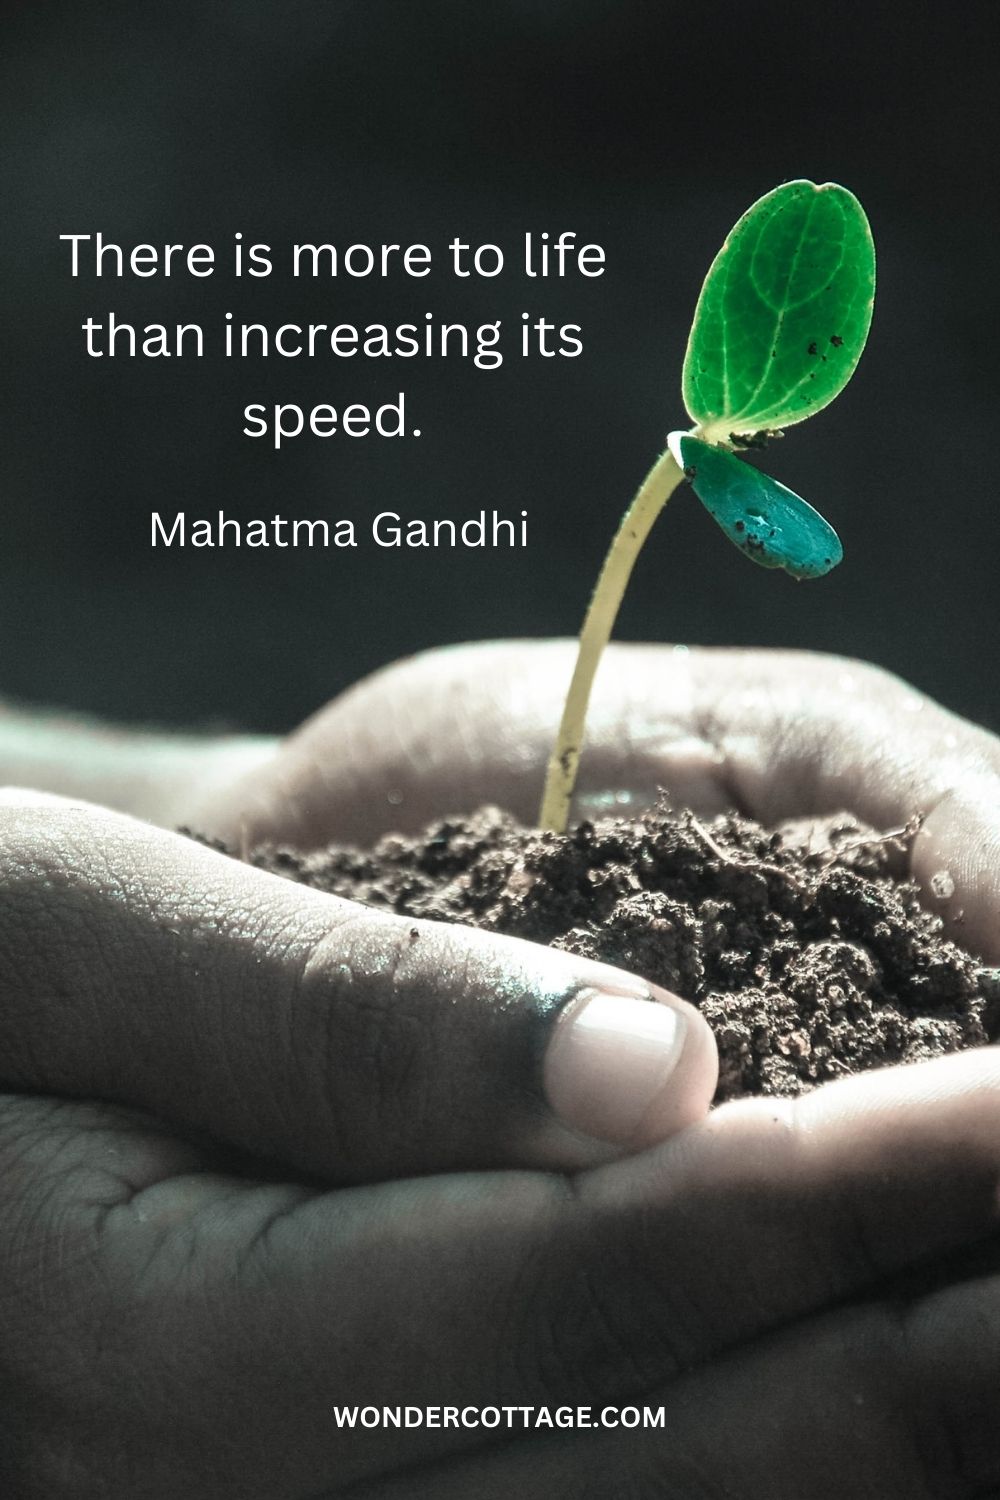 There is more to life than increasing its speed.  Mahatma Gandhi